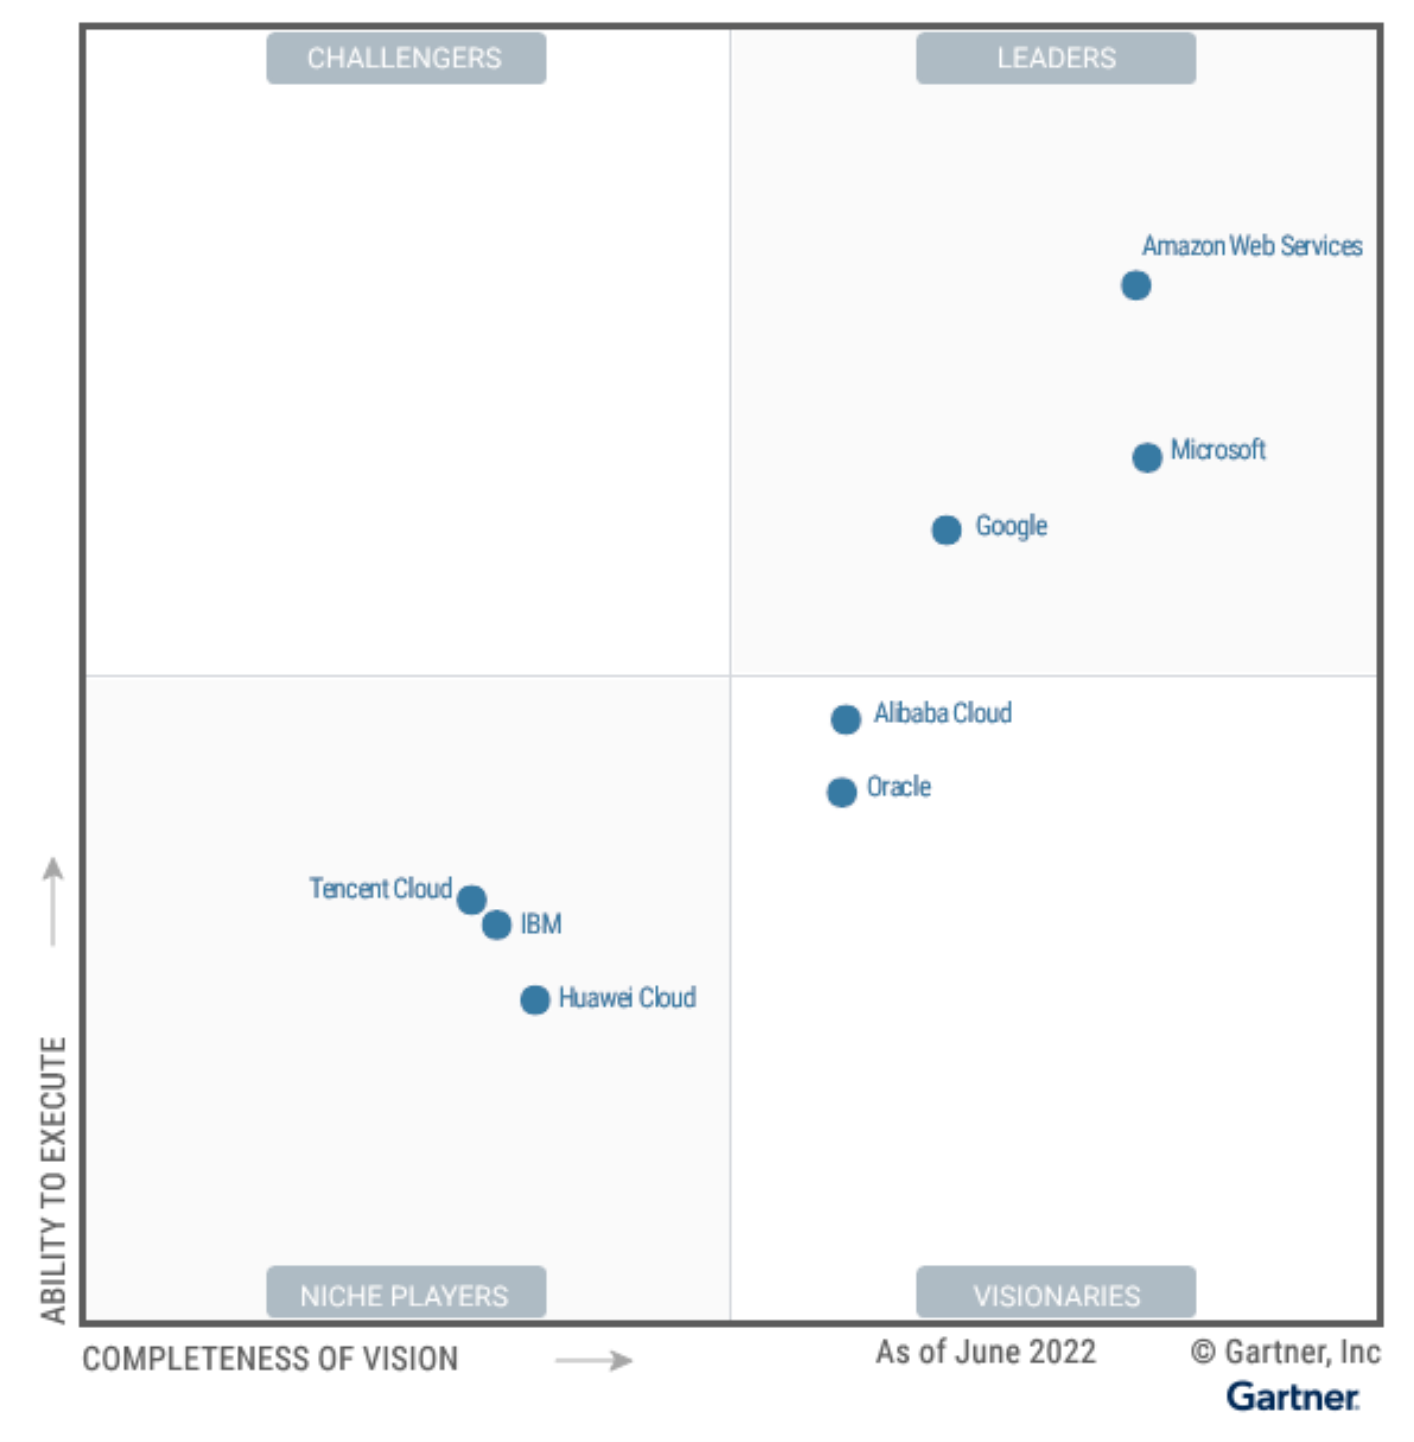 iTWire - Gartner magic quadrant shows same leaders but under the ...